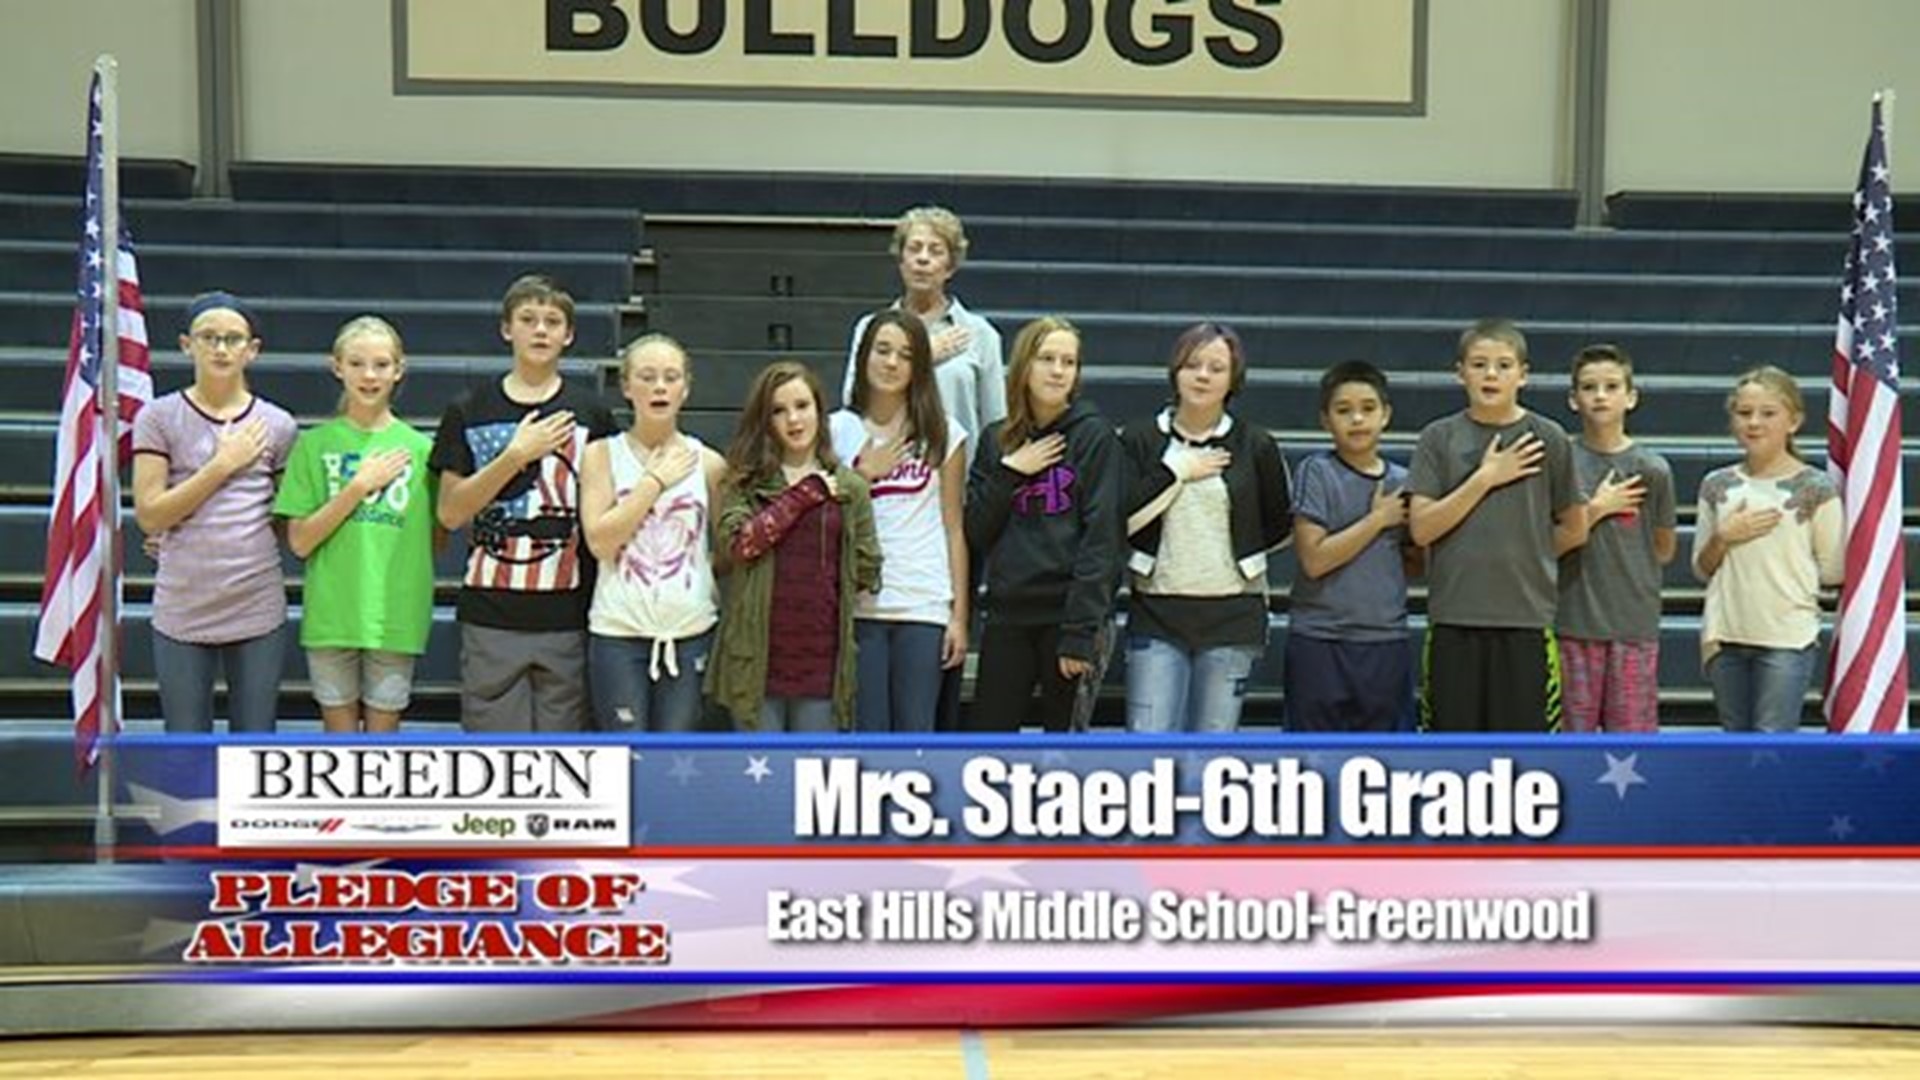 East Hills Middle School, Greenwood - Mrs. Staed - 6th Grade